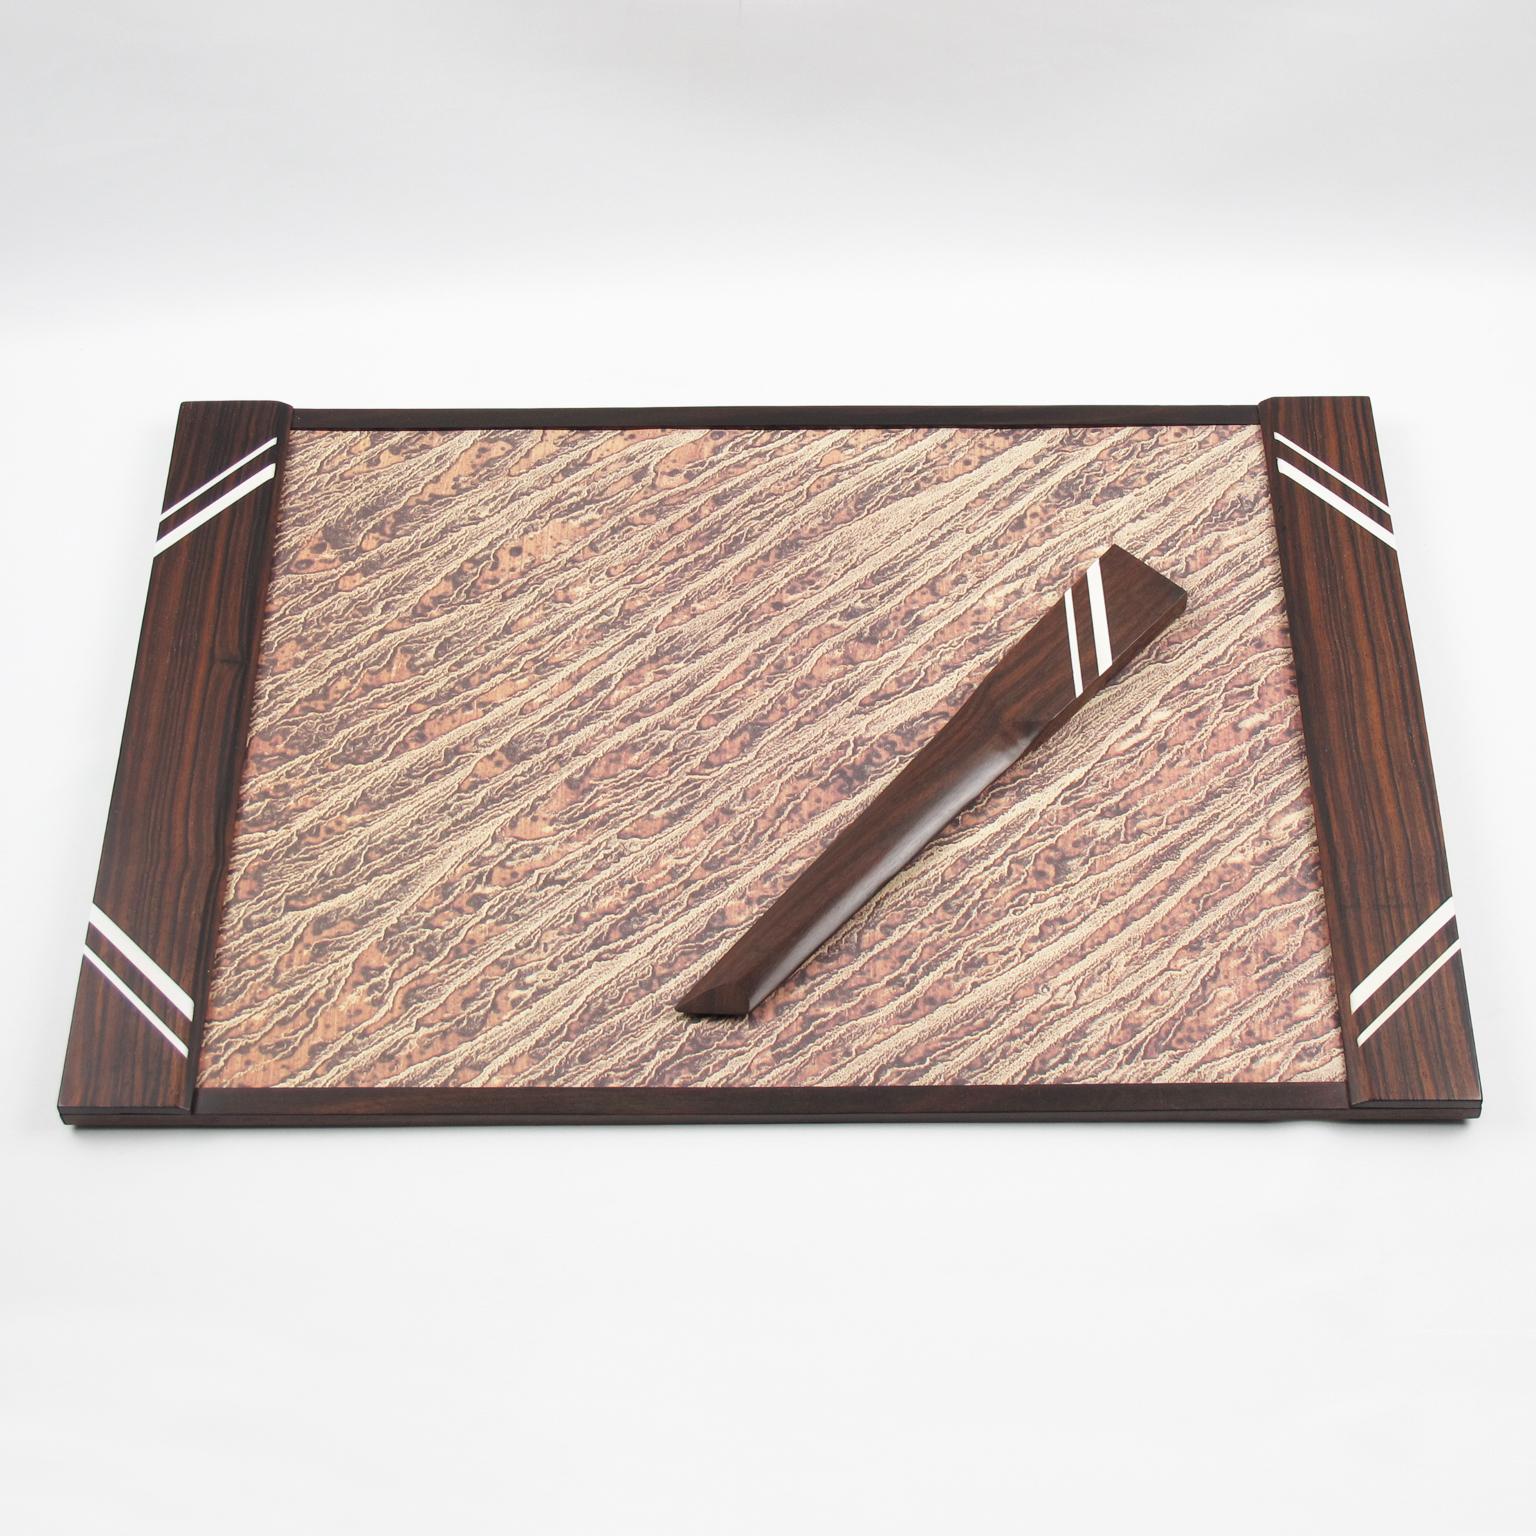 Stunning French Art Deco desk set, featuring a large blotter pad and letter opener in Macassar wood with white Galalith trimmed inlaid decor.
Measurements:
Blotter pad: 19.88 in. wide (50.5 cm) x 13.38 in. deep (34 cm)
Letter opener: 10.82 in.